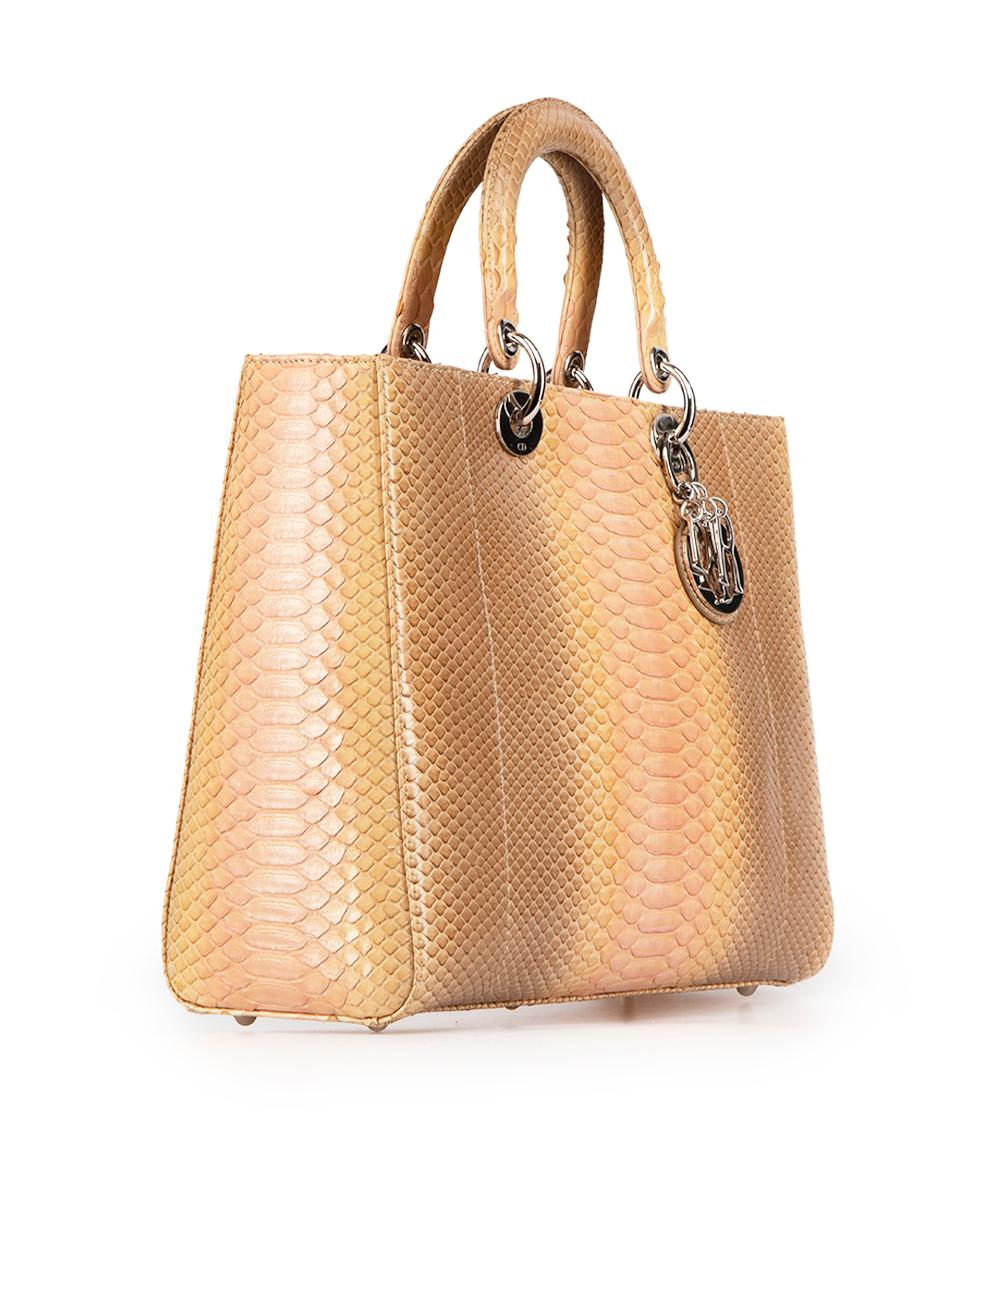 CONDITION is Very good. Minimal wear to bag is evident. Minimal wear to the texture of the snakeskin with very light peeling of the grain on this used Dior designer resale item. This bag comes with original dust bag.
 
 Details
 Lady Dior Tote
